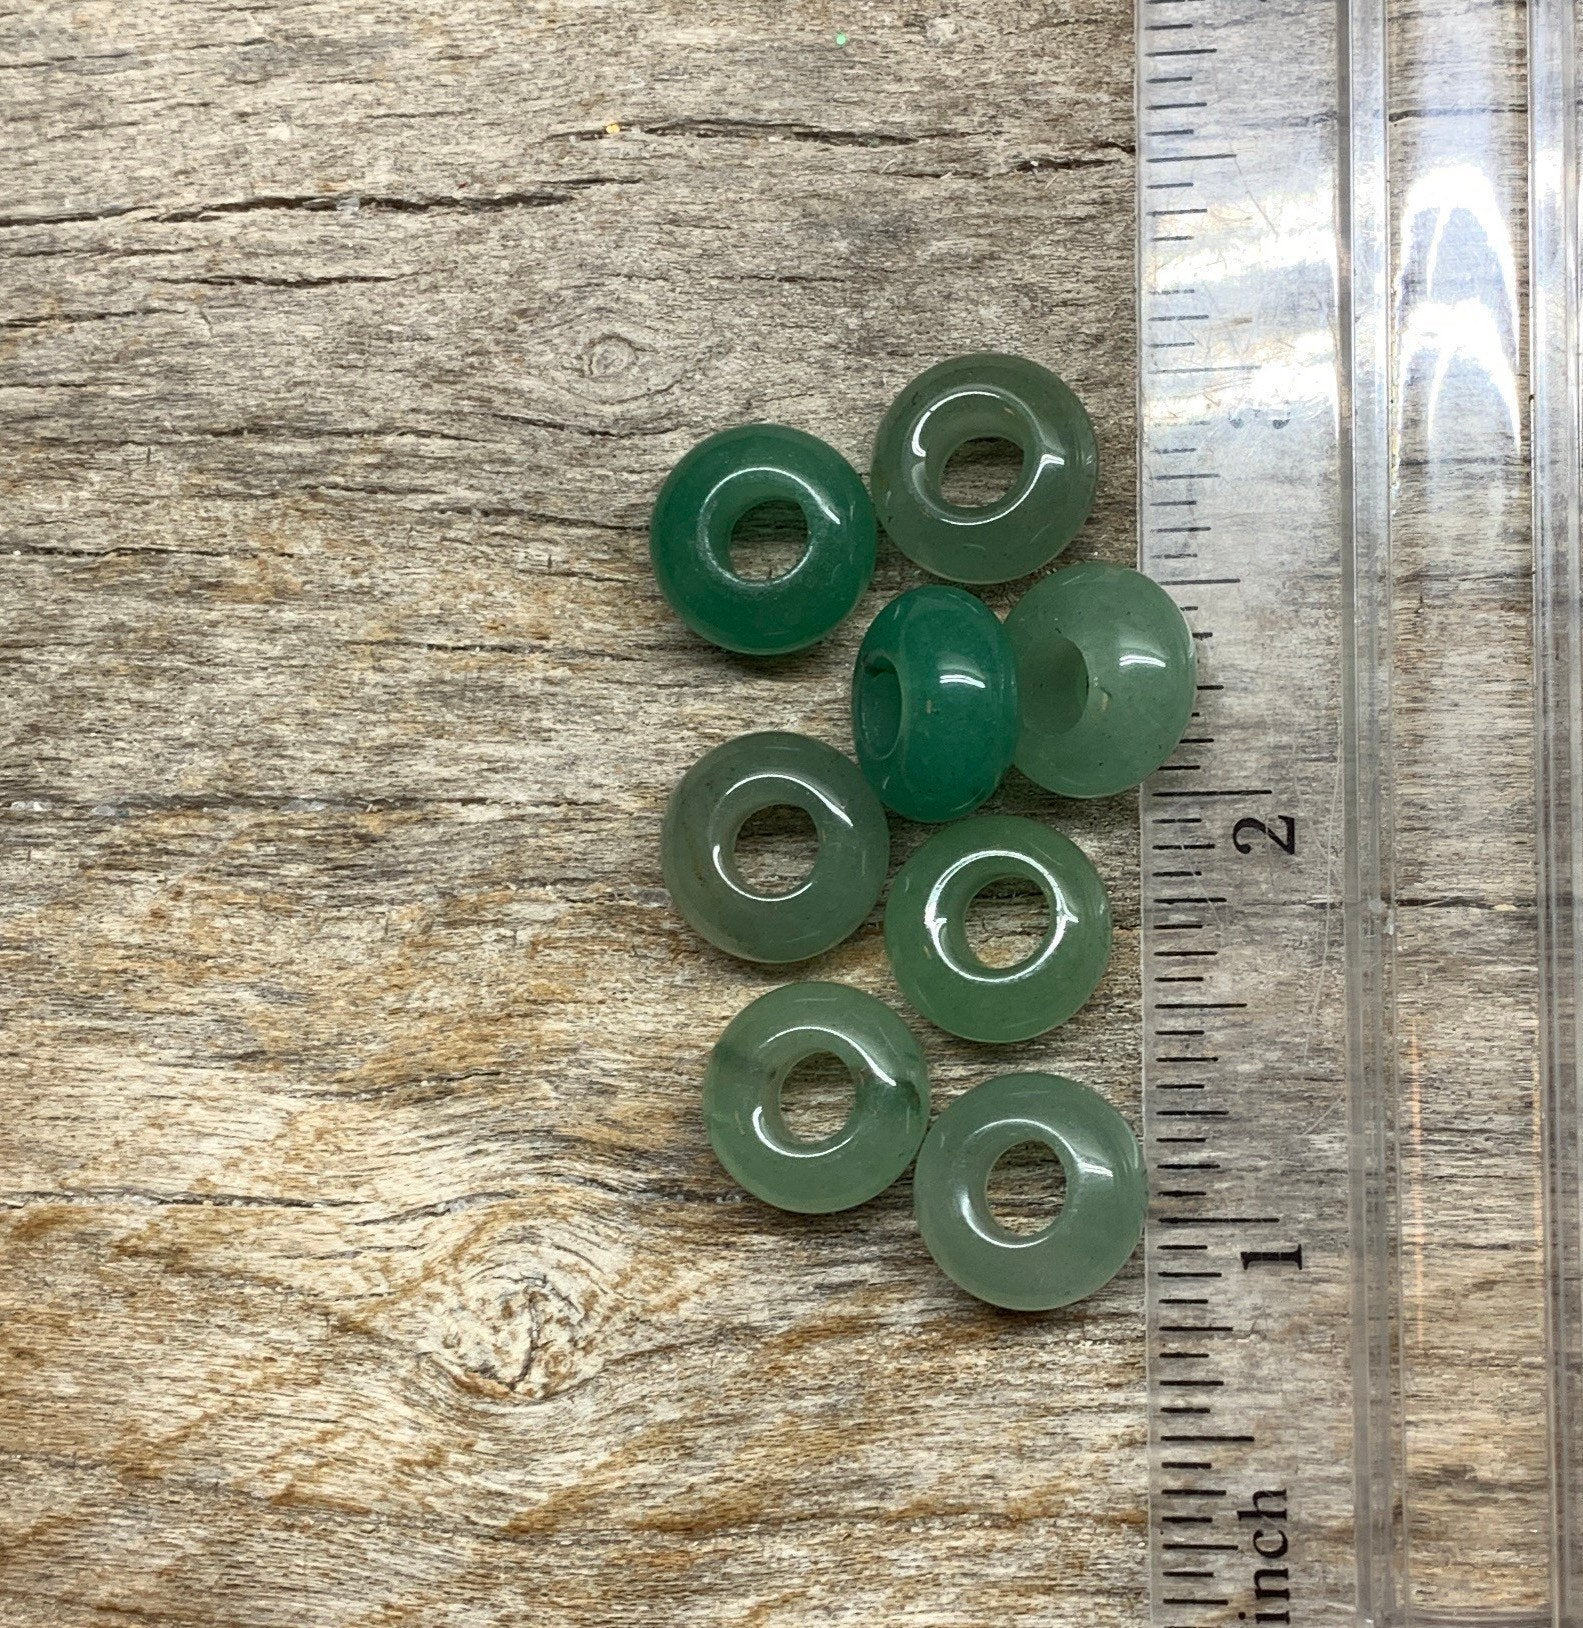 "Close-up of 14mm round green Aventurine beads, showing their smooth surface and rich color, positioned next to a ruler